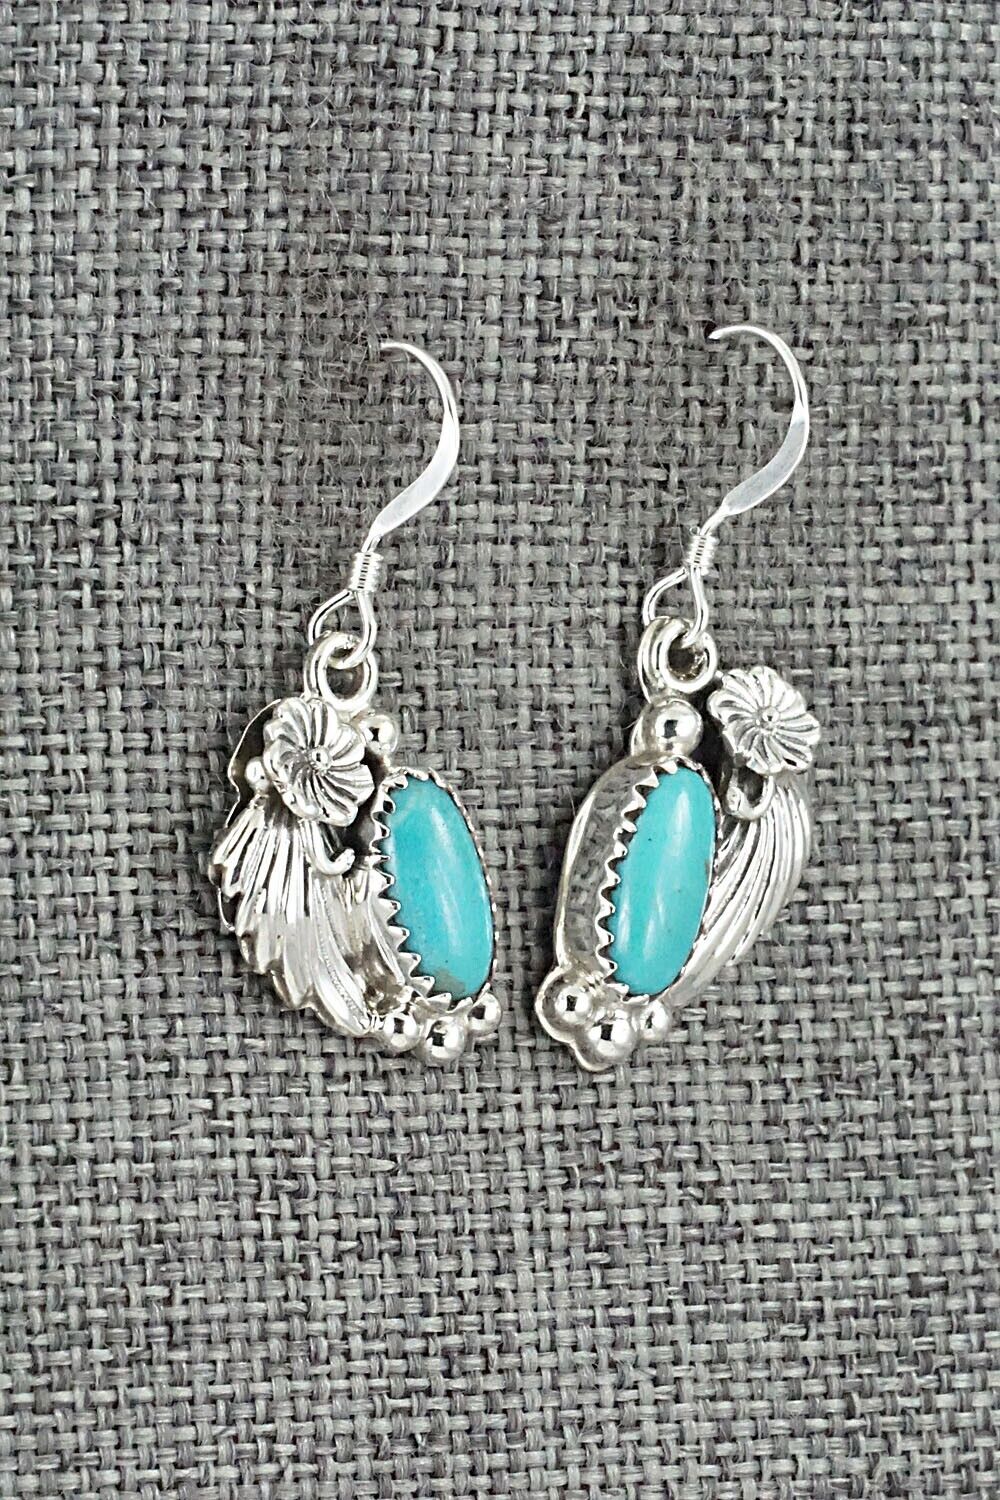 Turquoise and Sterling Silver Earrings - Andrew Vandever